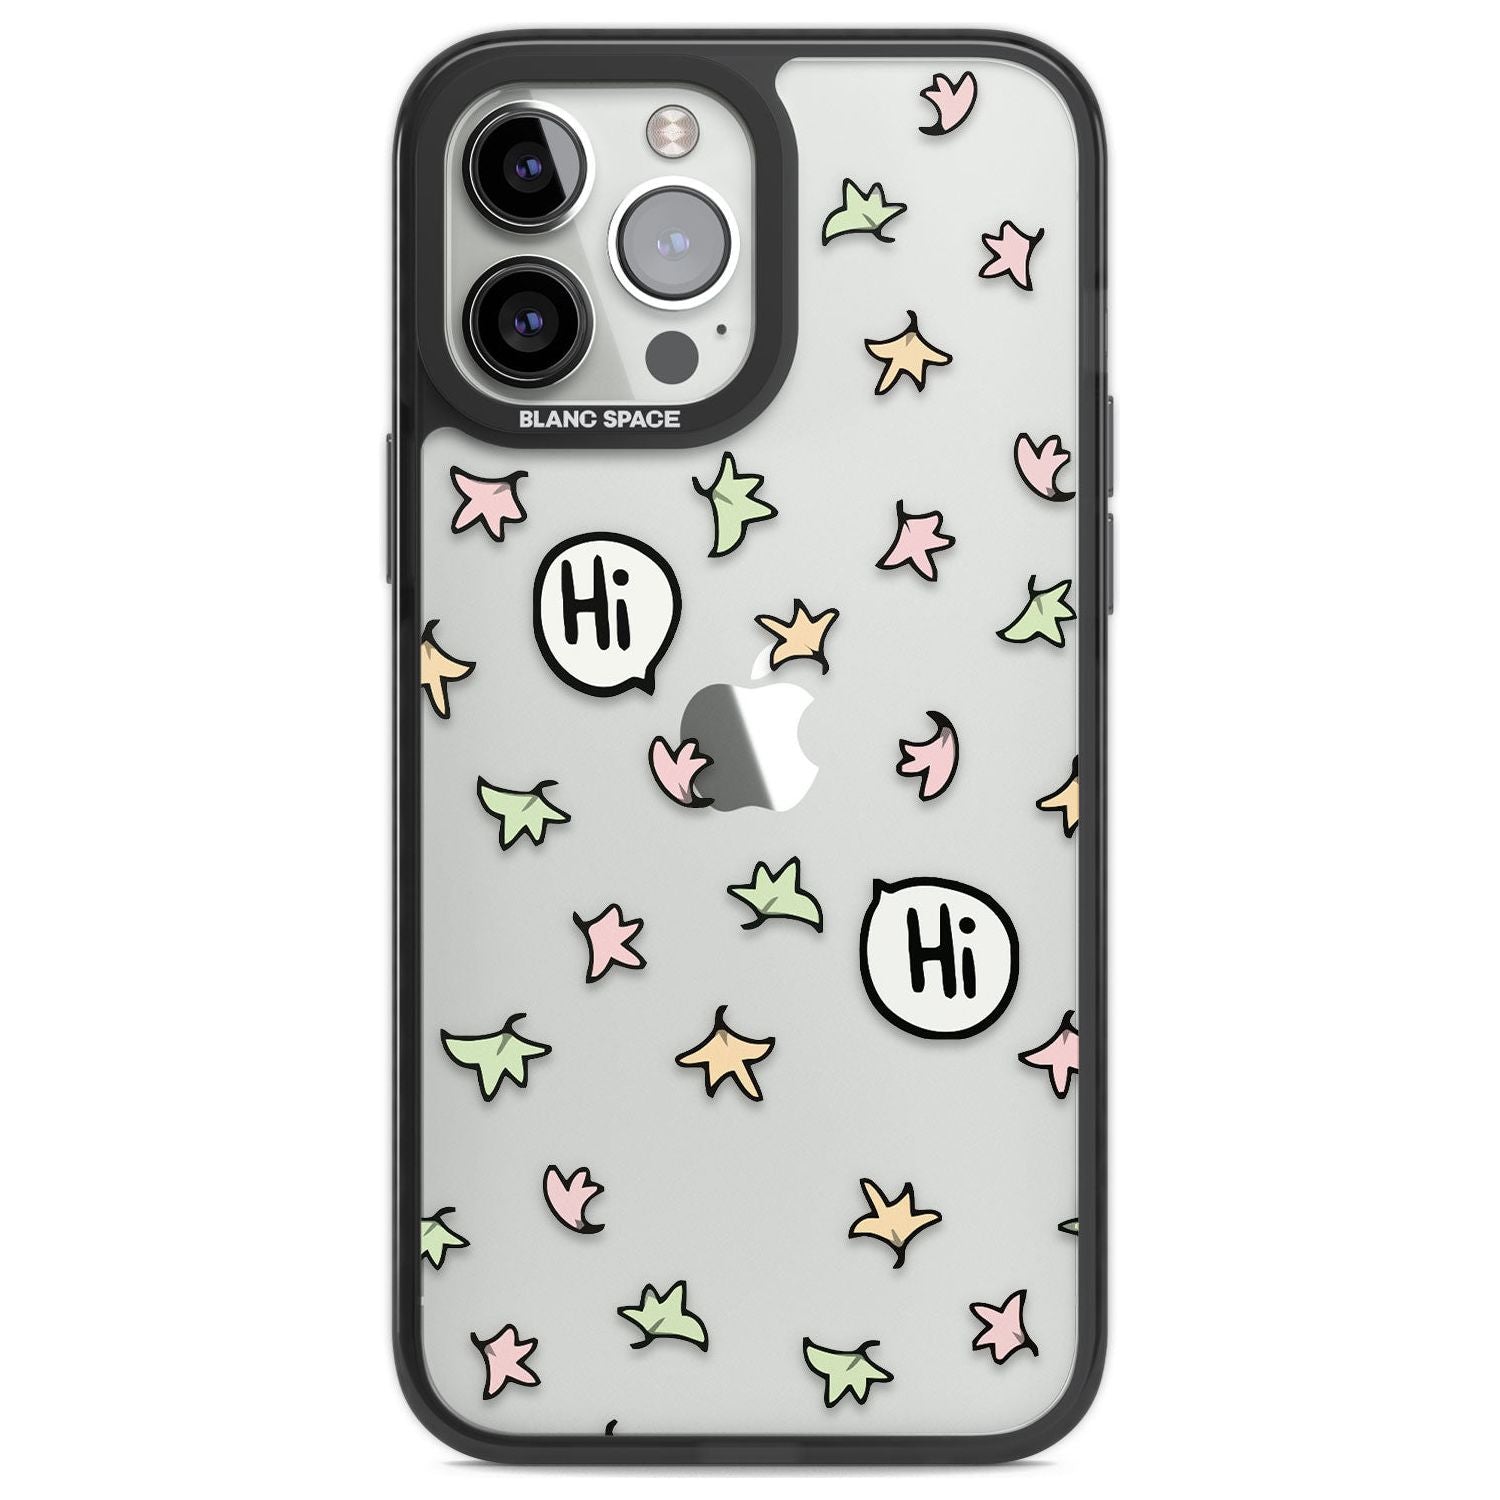 Heartstopper Leaves Pattern Phone Case iPhone 13 Pro Max / Black Impact Case,iPhone 14 Pro Max / Black Impact Case Blanc Space